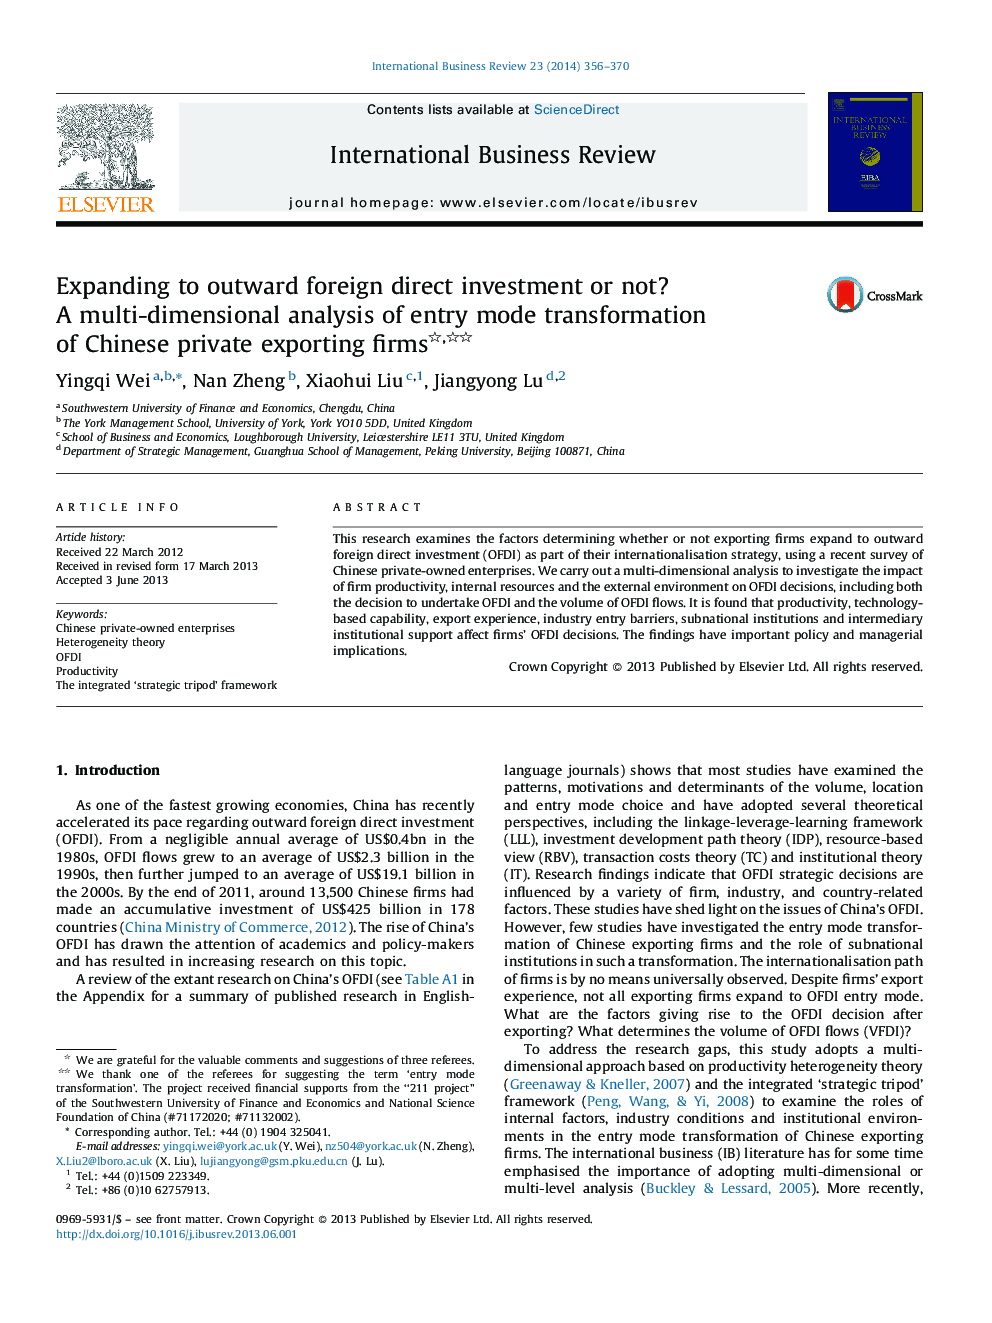 Expanding to outward foreign direct investment or not? A multi-dimensional analysis of entry mode transformation of Chinese private exporting firms